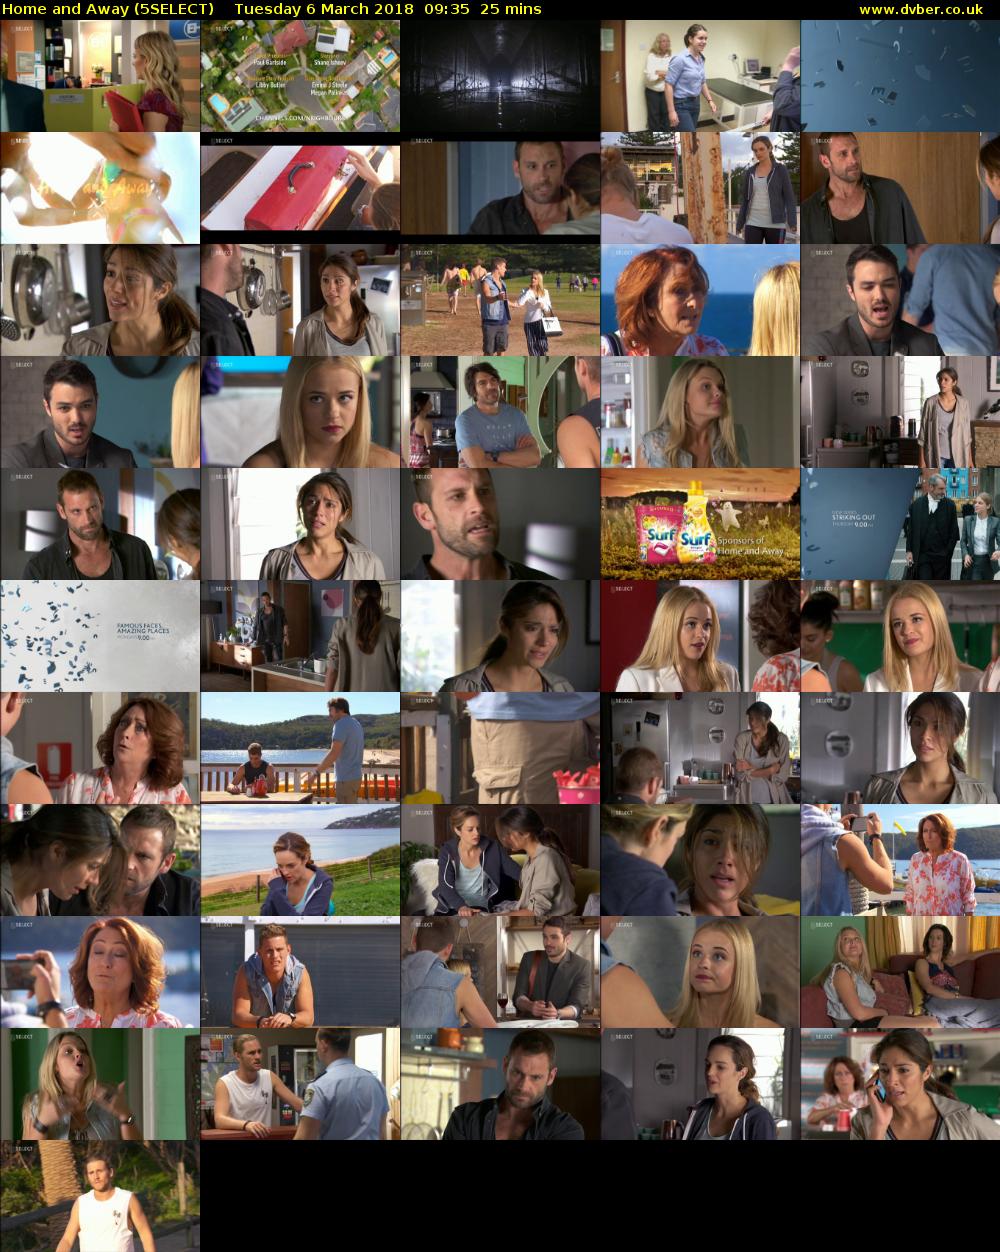 Home and Away (5SELECT) Tuesday 6 March 2018 09:35 - 10:00